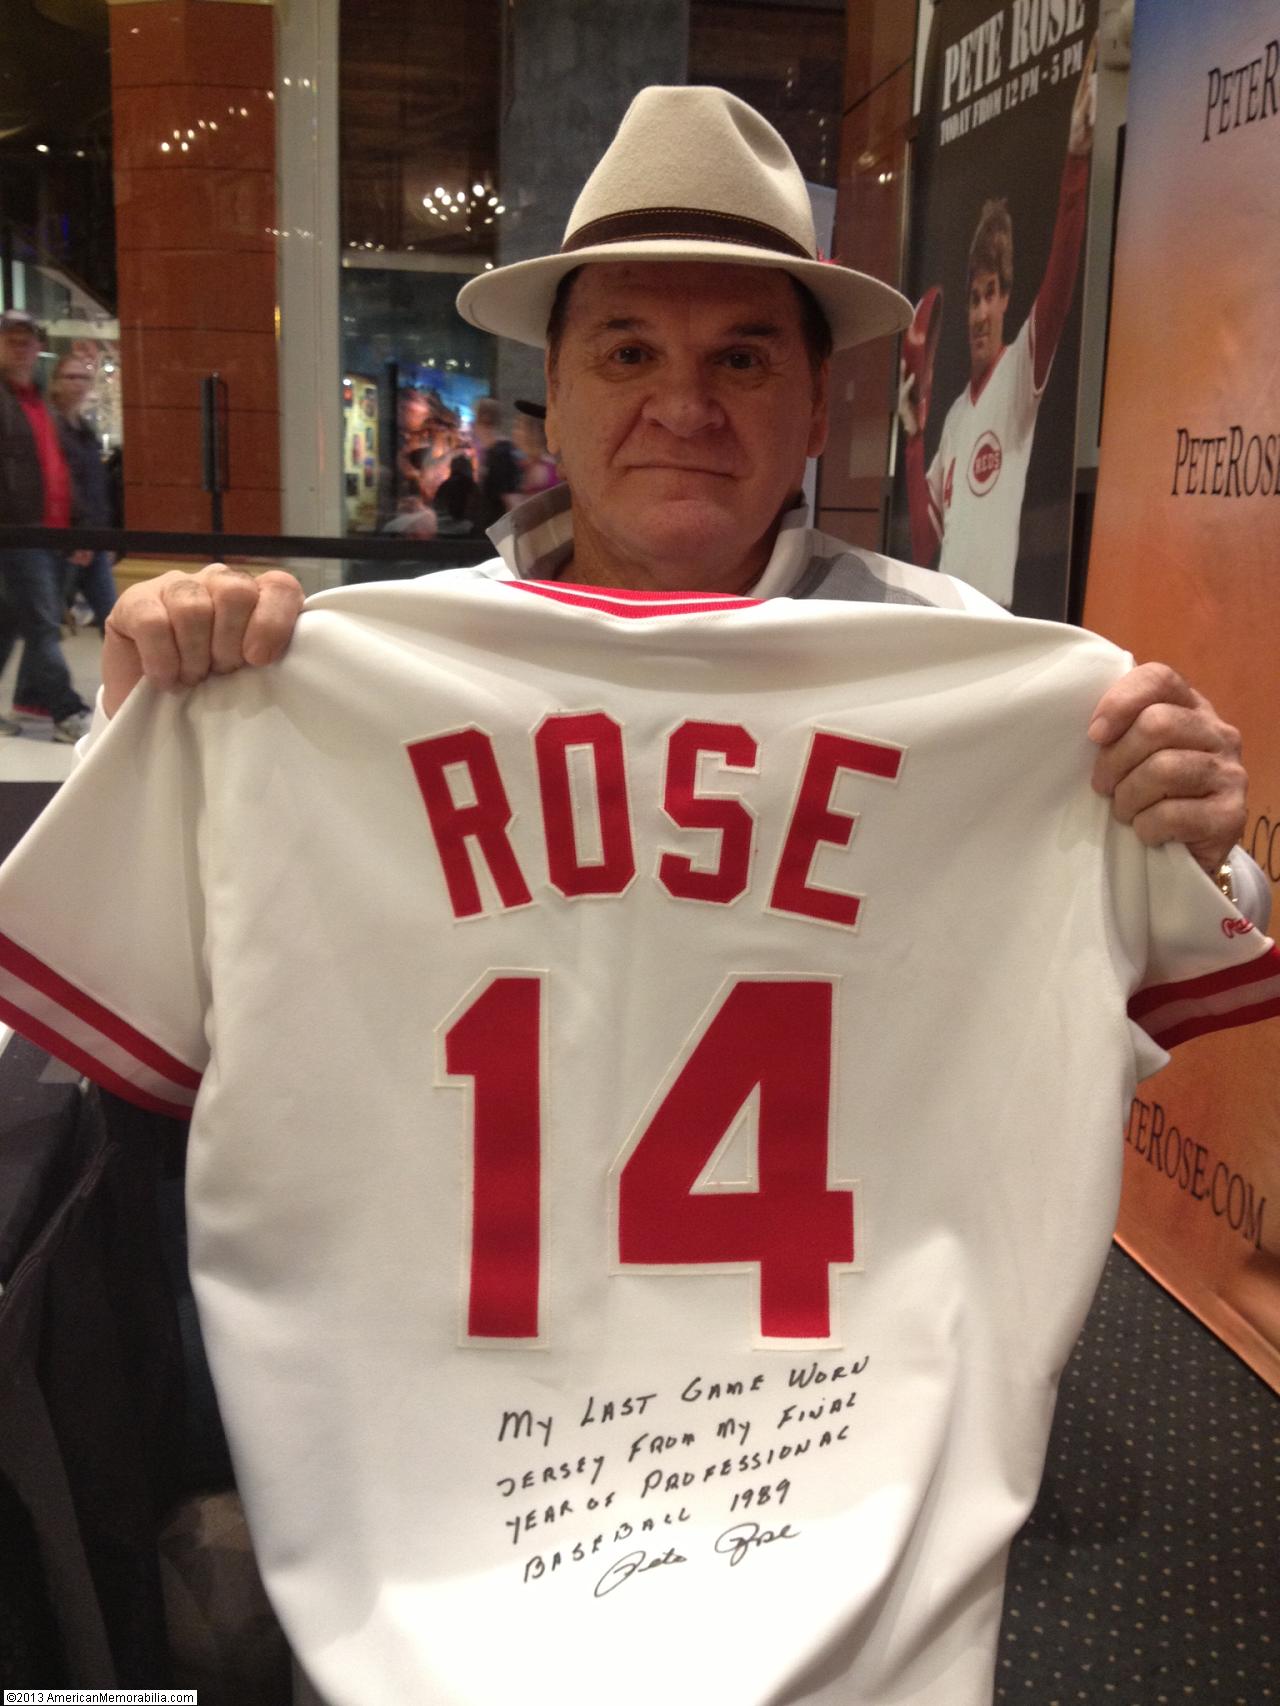 pete rose jersey signed